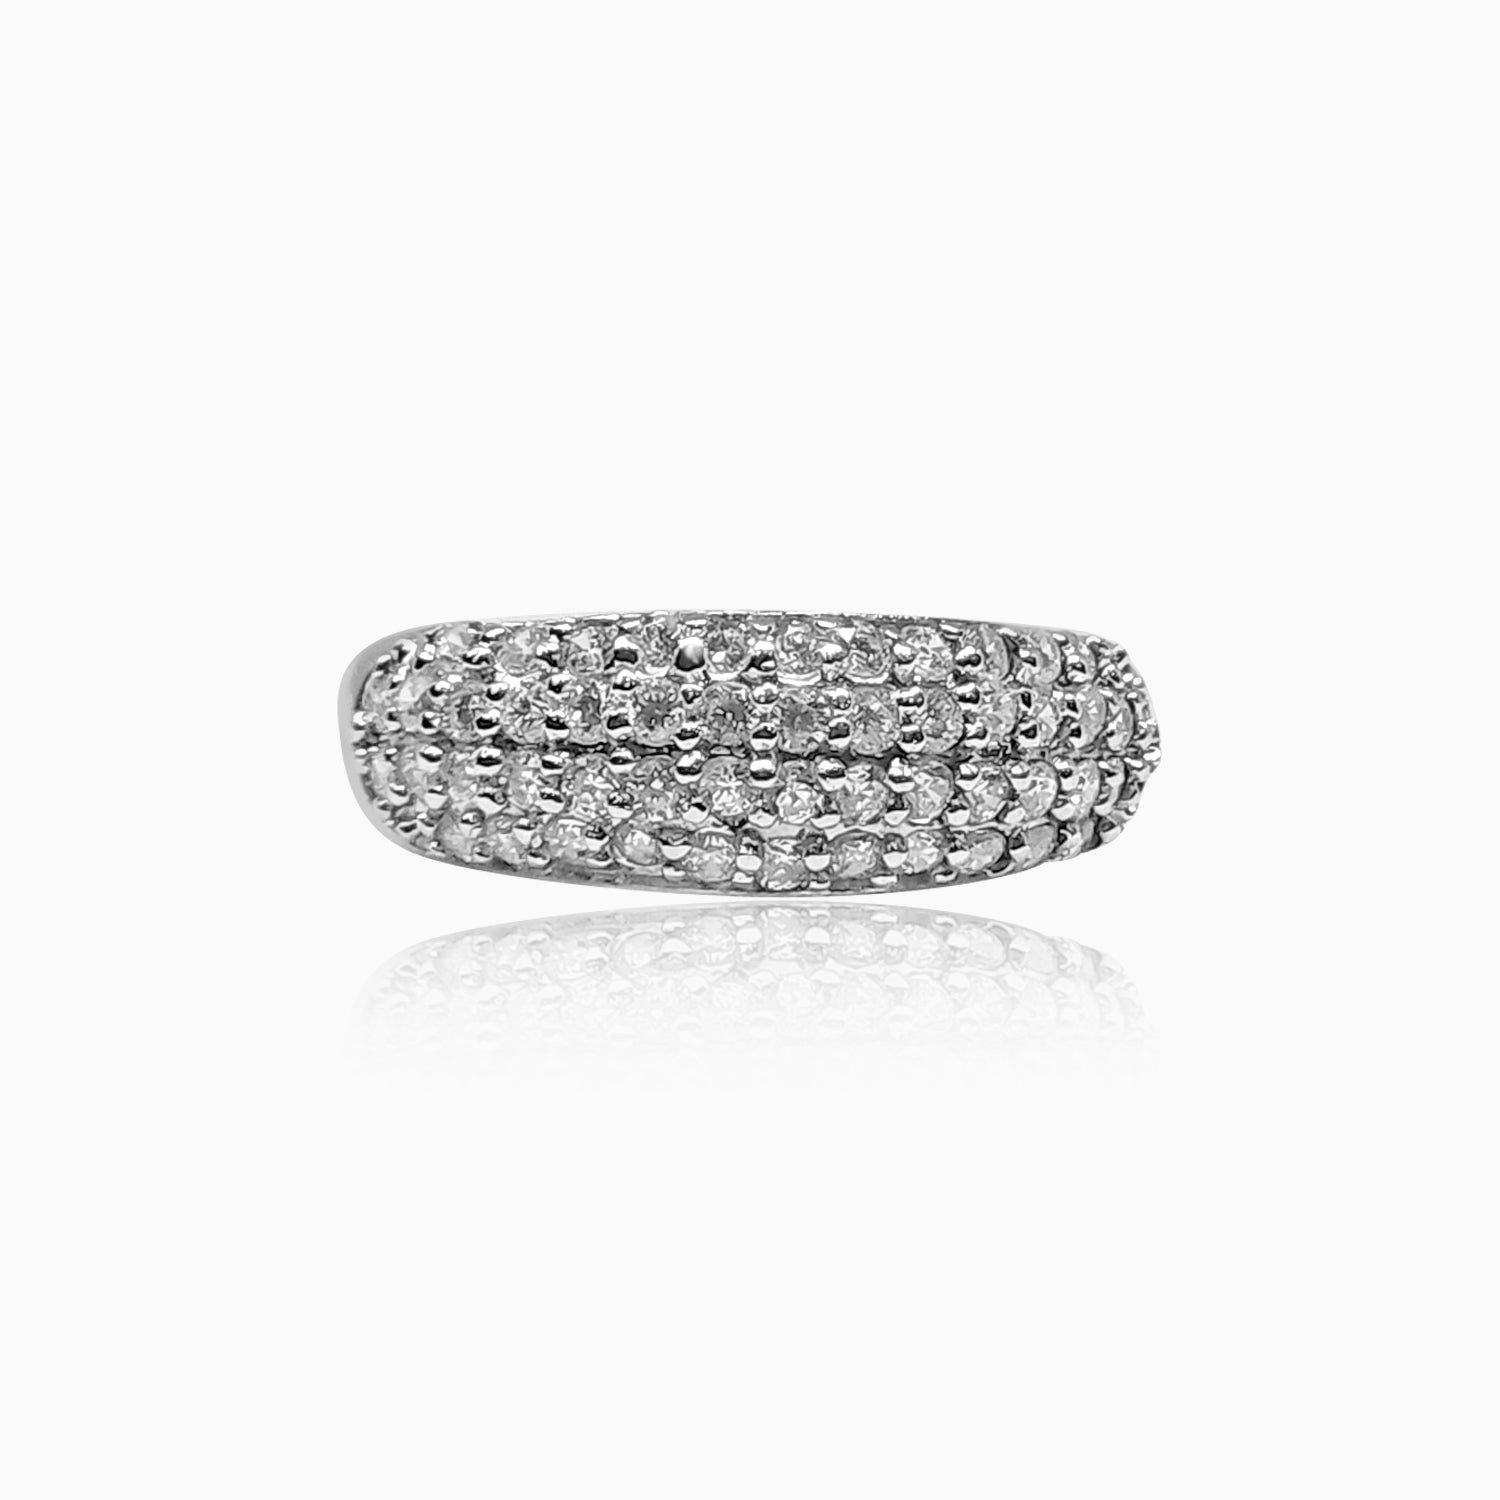 Silver Sparkling Band Ring 6.5mm